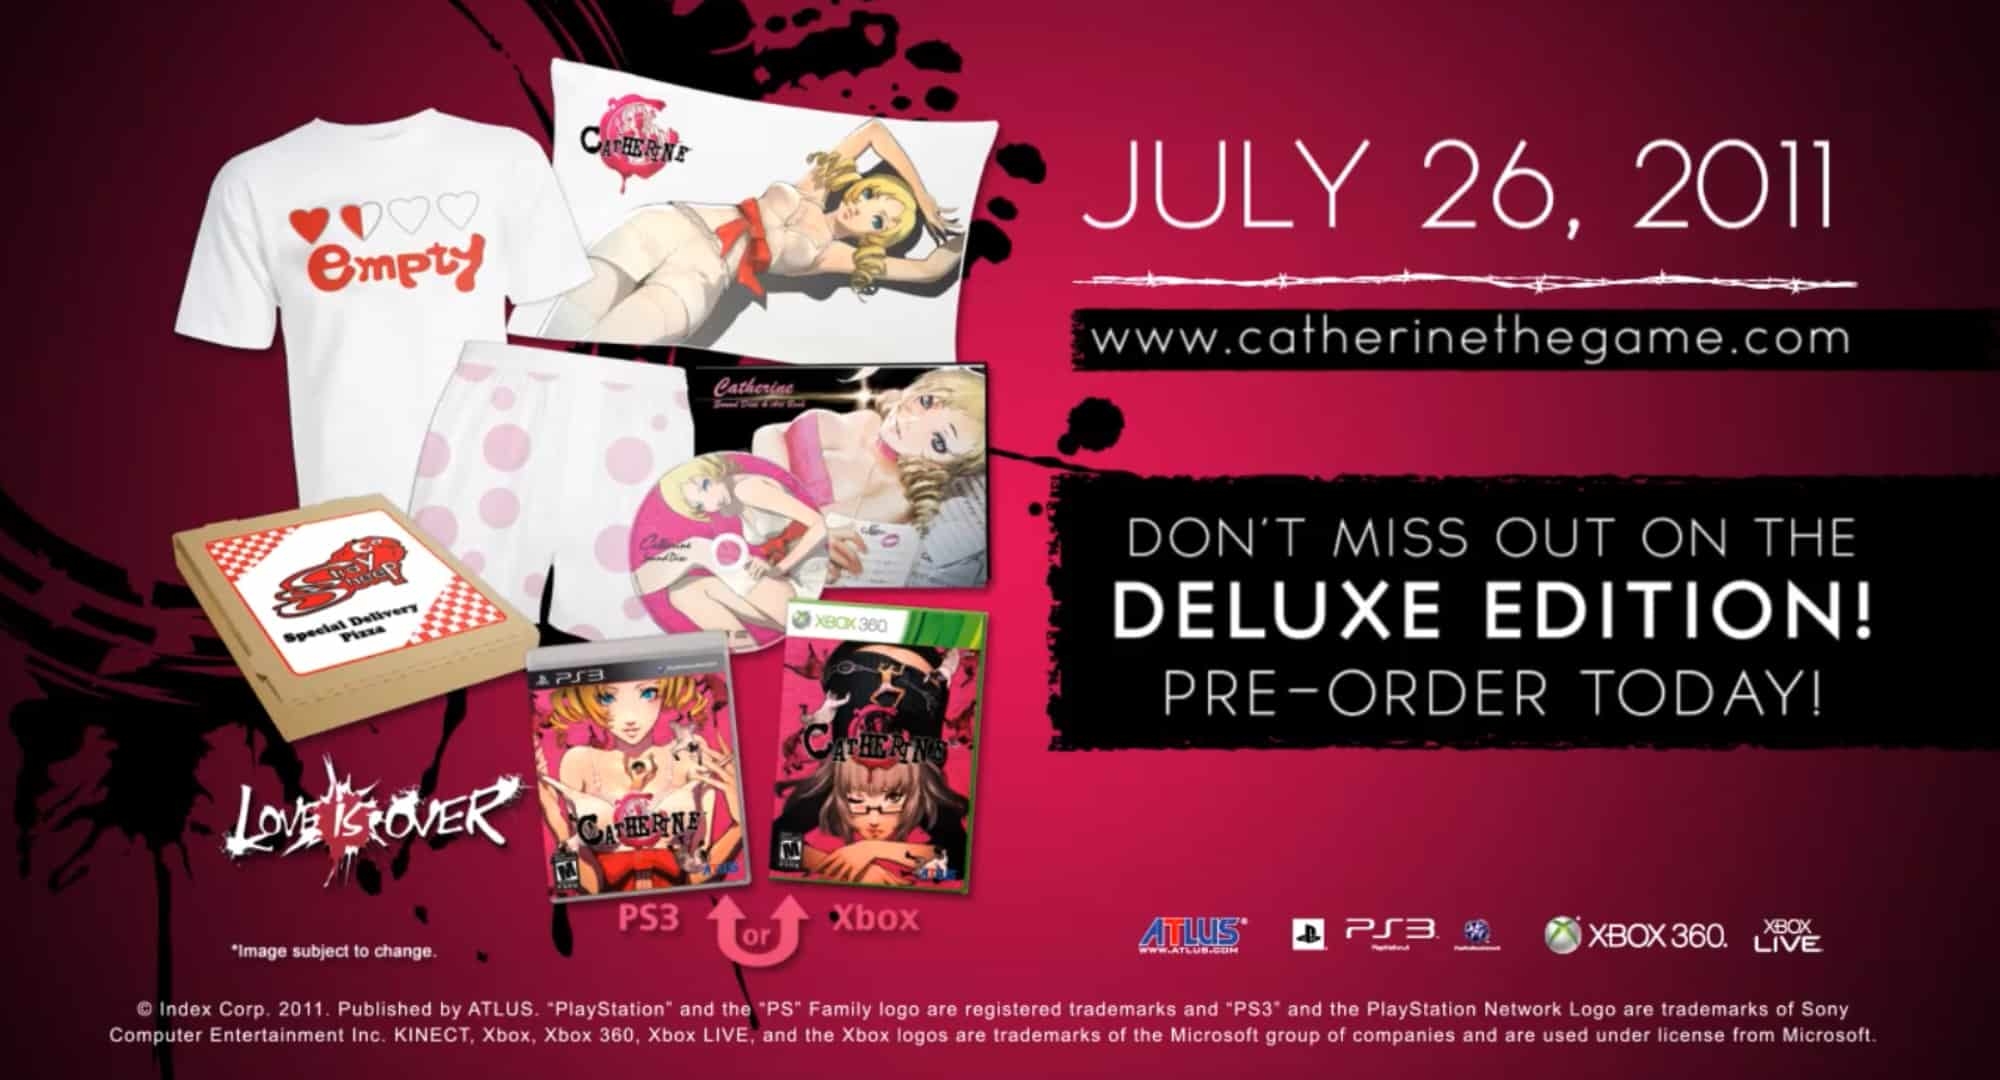 catherine-release-date-artwork-of-deluxe-edition.jpg